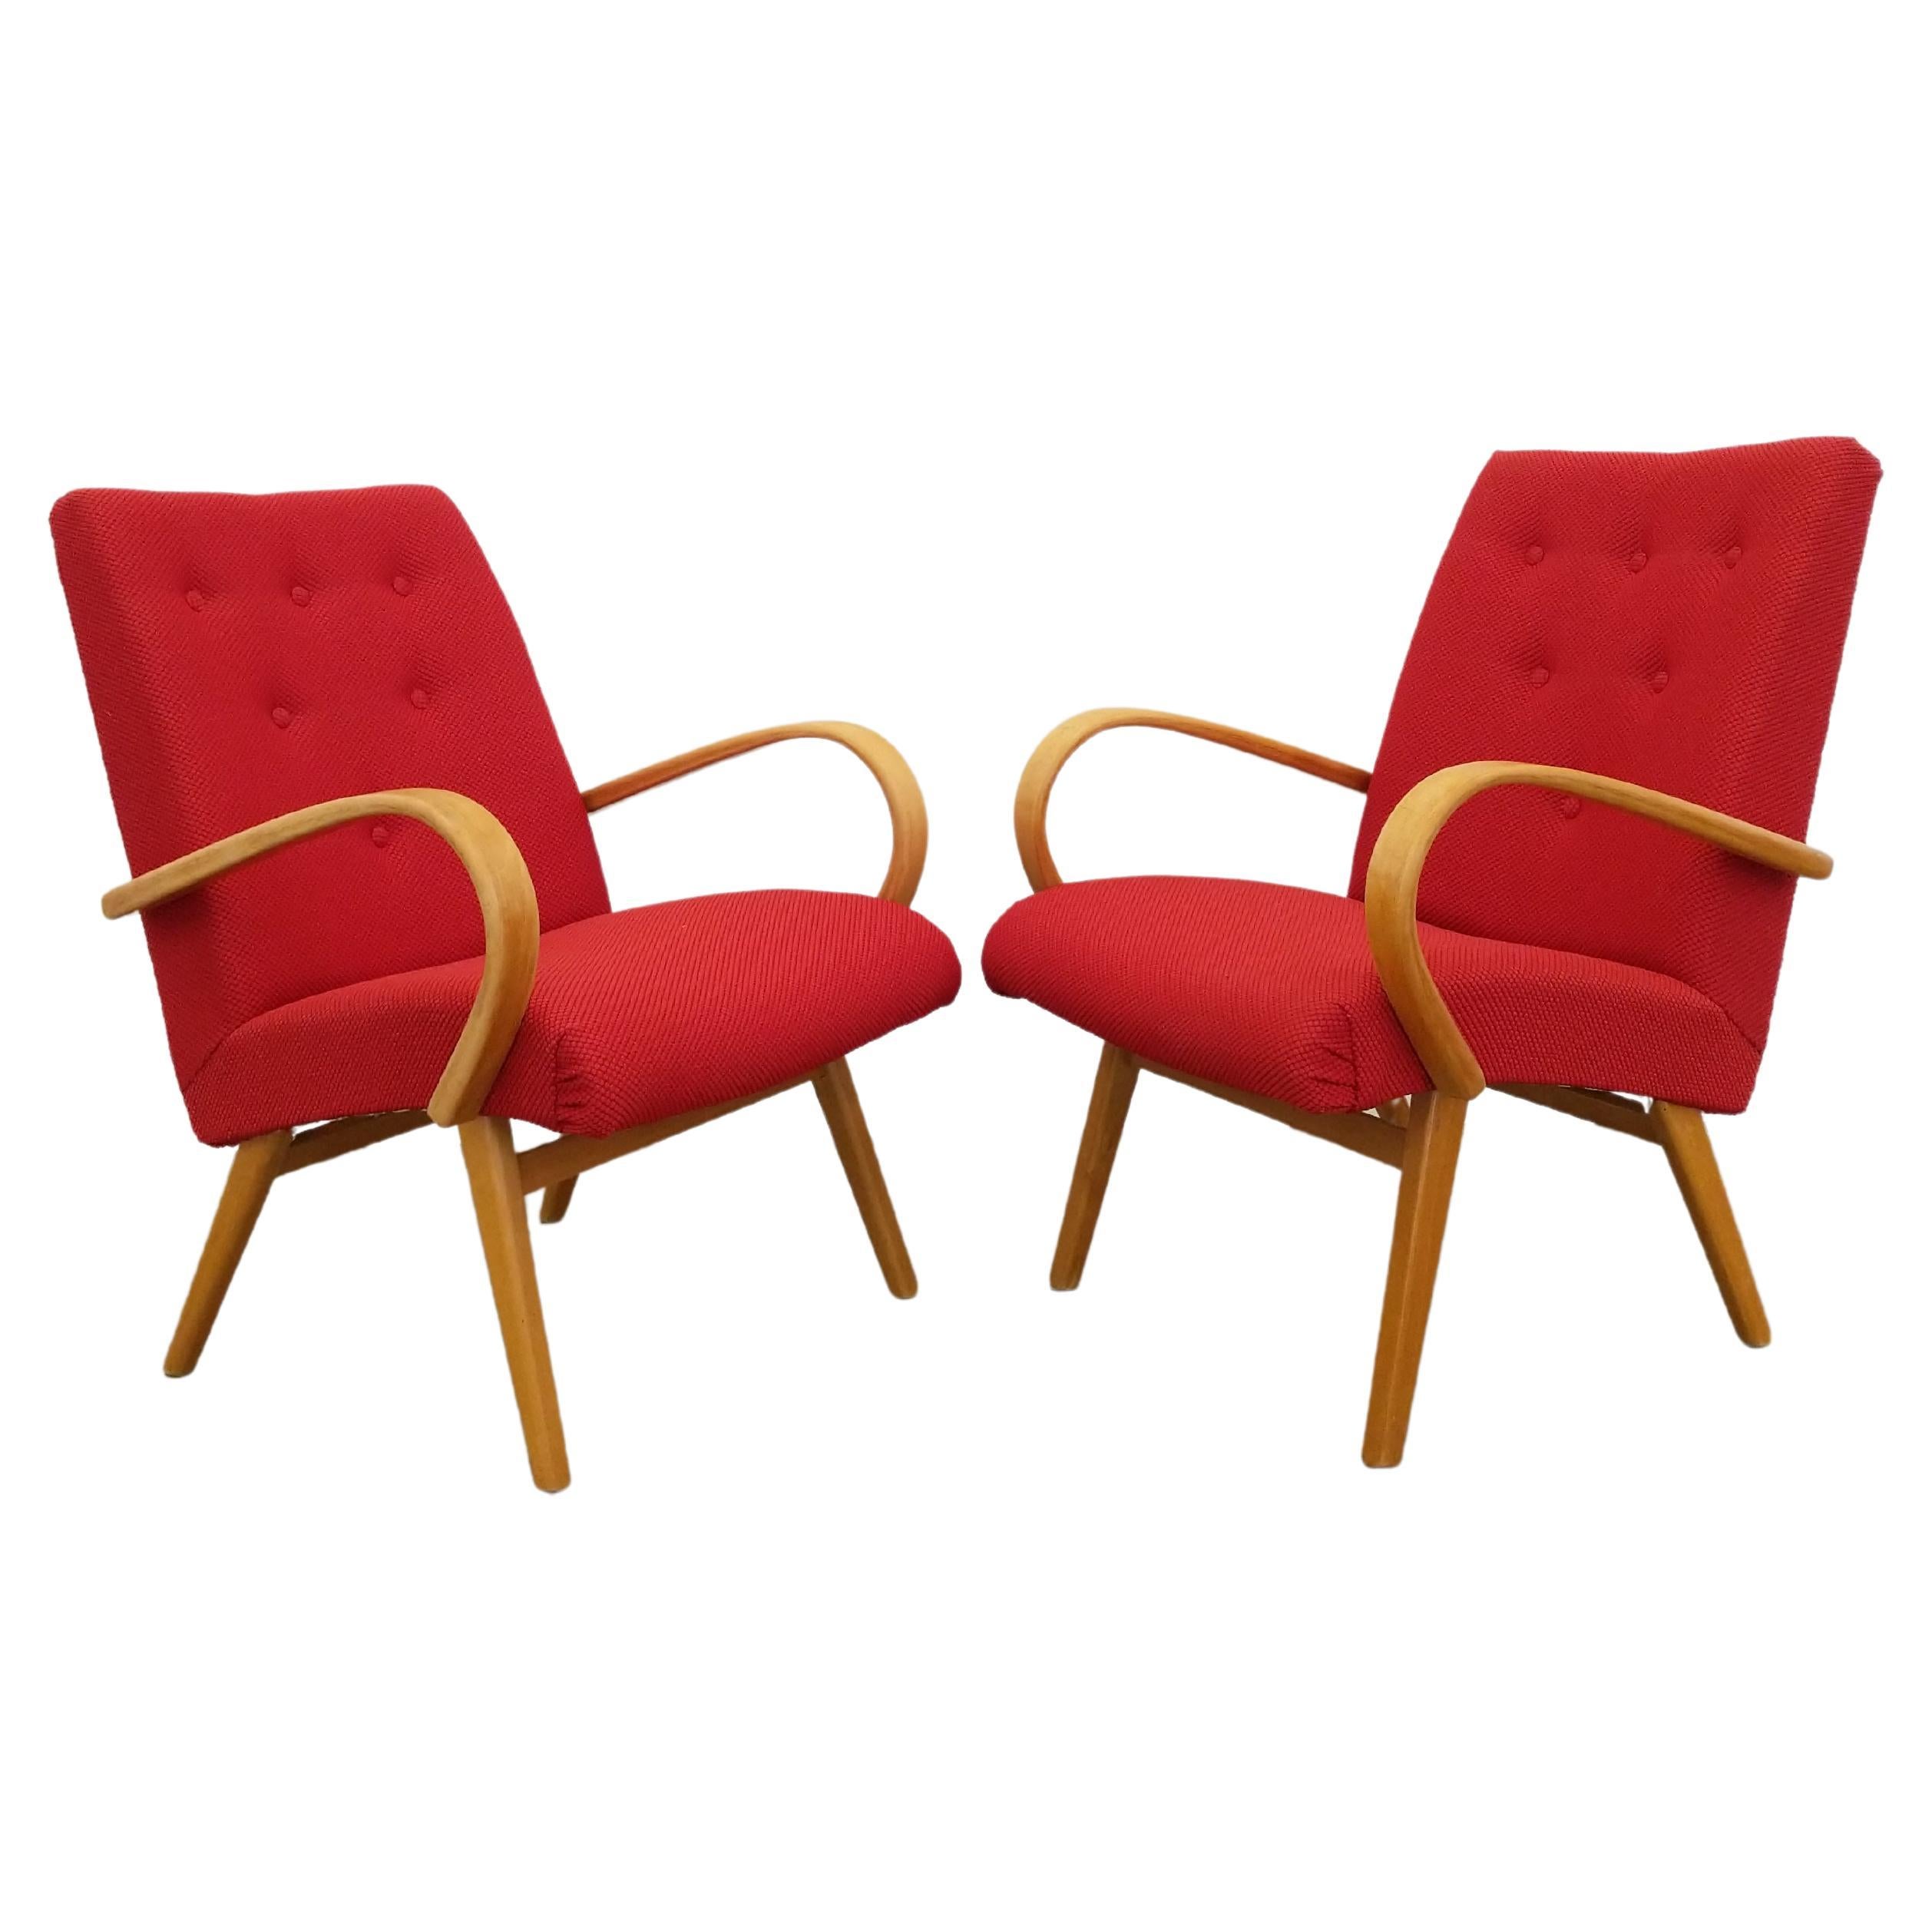 Pair of Vintage Czech Mid Century Modern Lounge Chairs